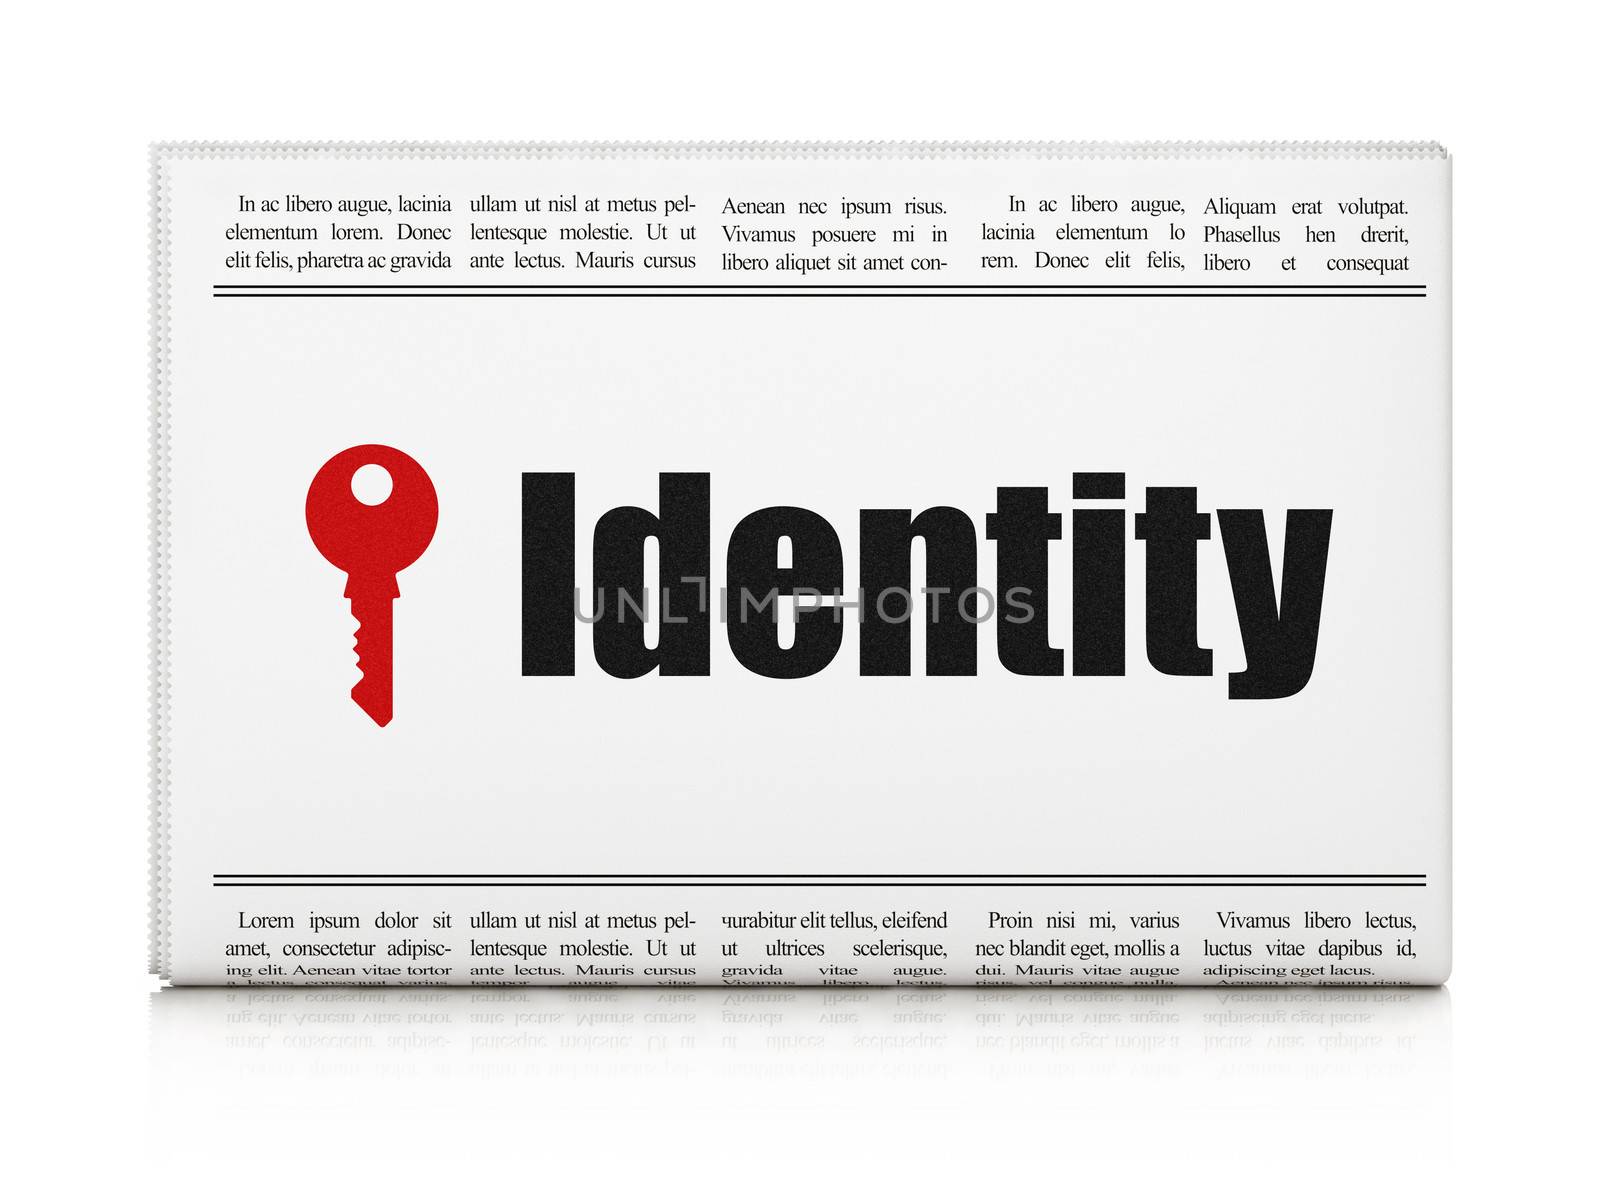 Safety concept: newspaper headline Identity and Key icon on White background, 3d render